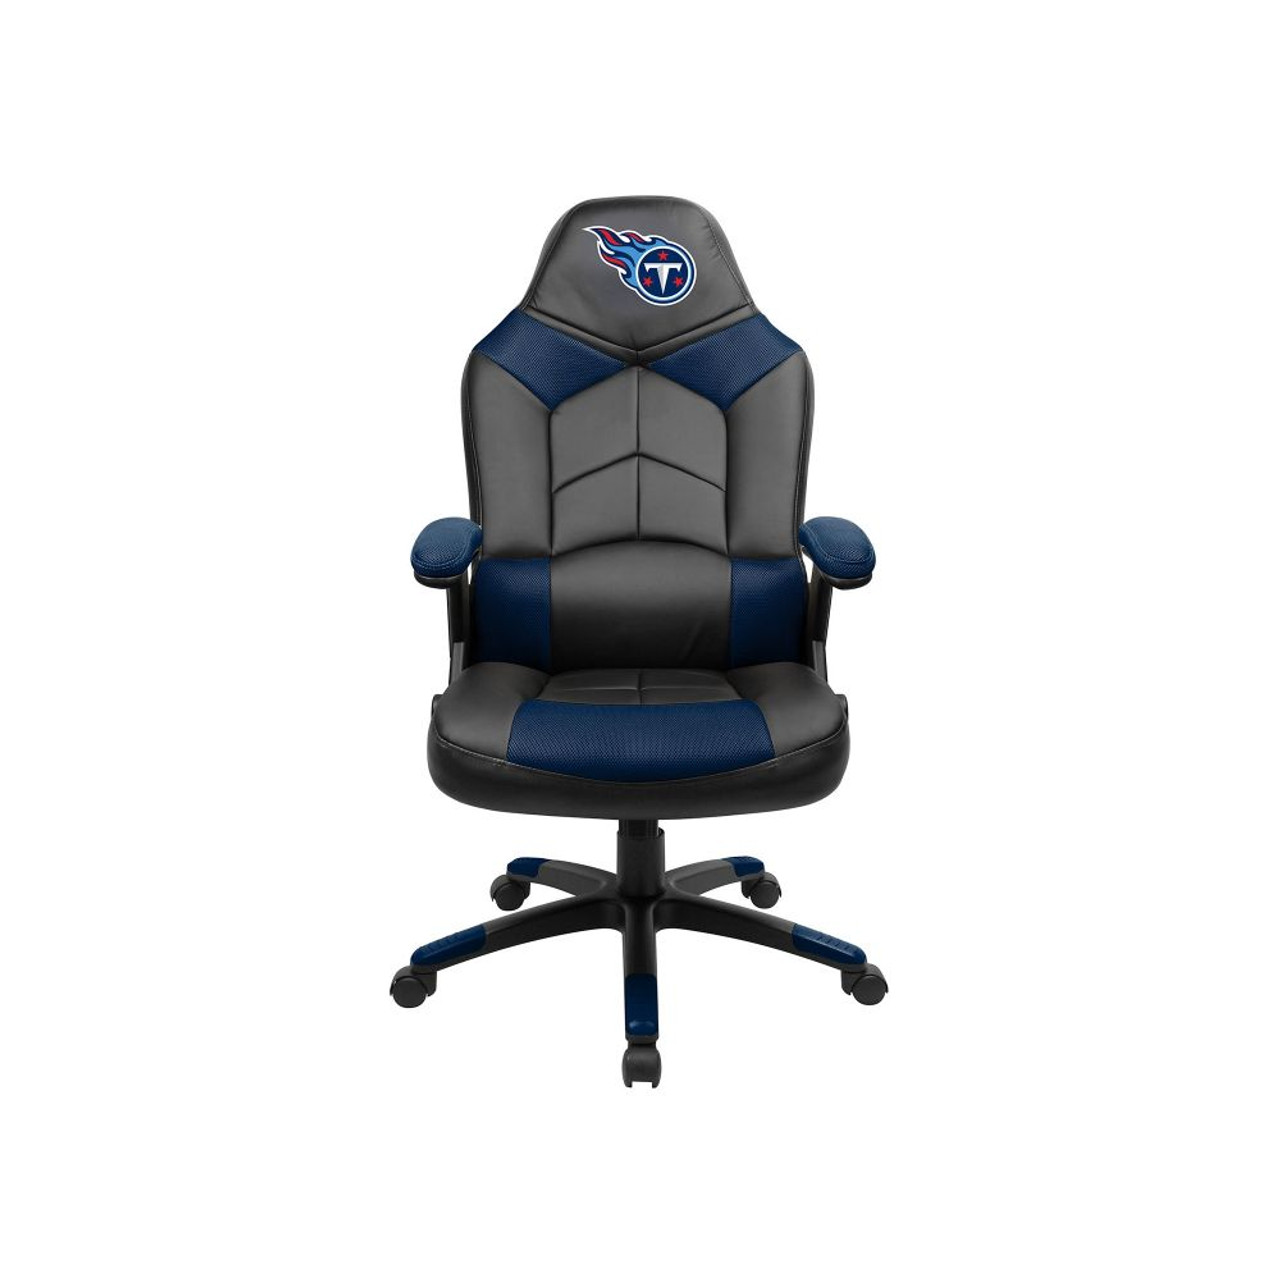 134-1028, TN, Tennessee, Titans, Oversized, Video, Gaming, Chair, FREE SHIPPING, NFL, Logo, Imperial, 720801341286